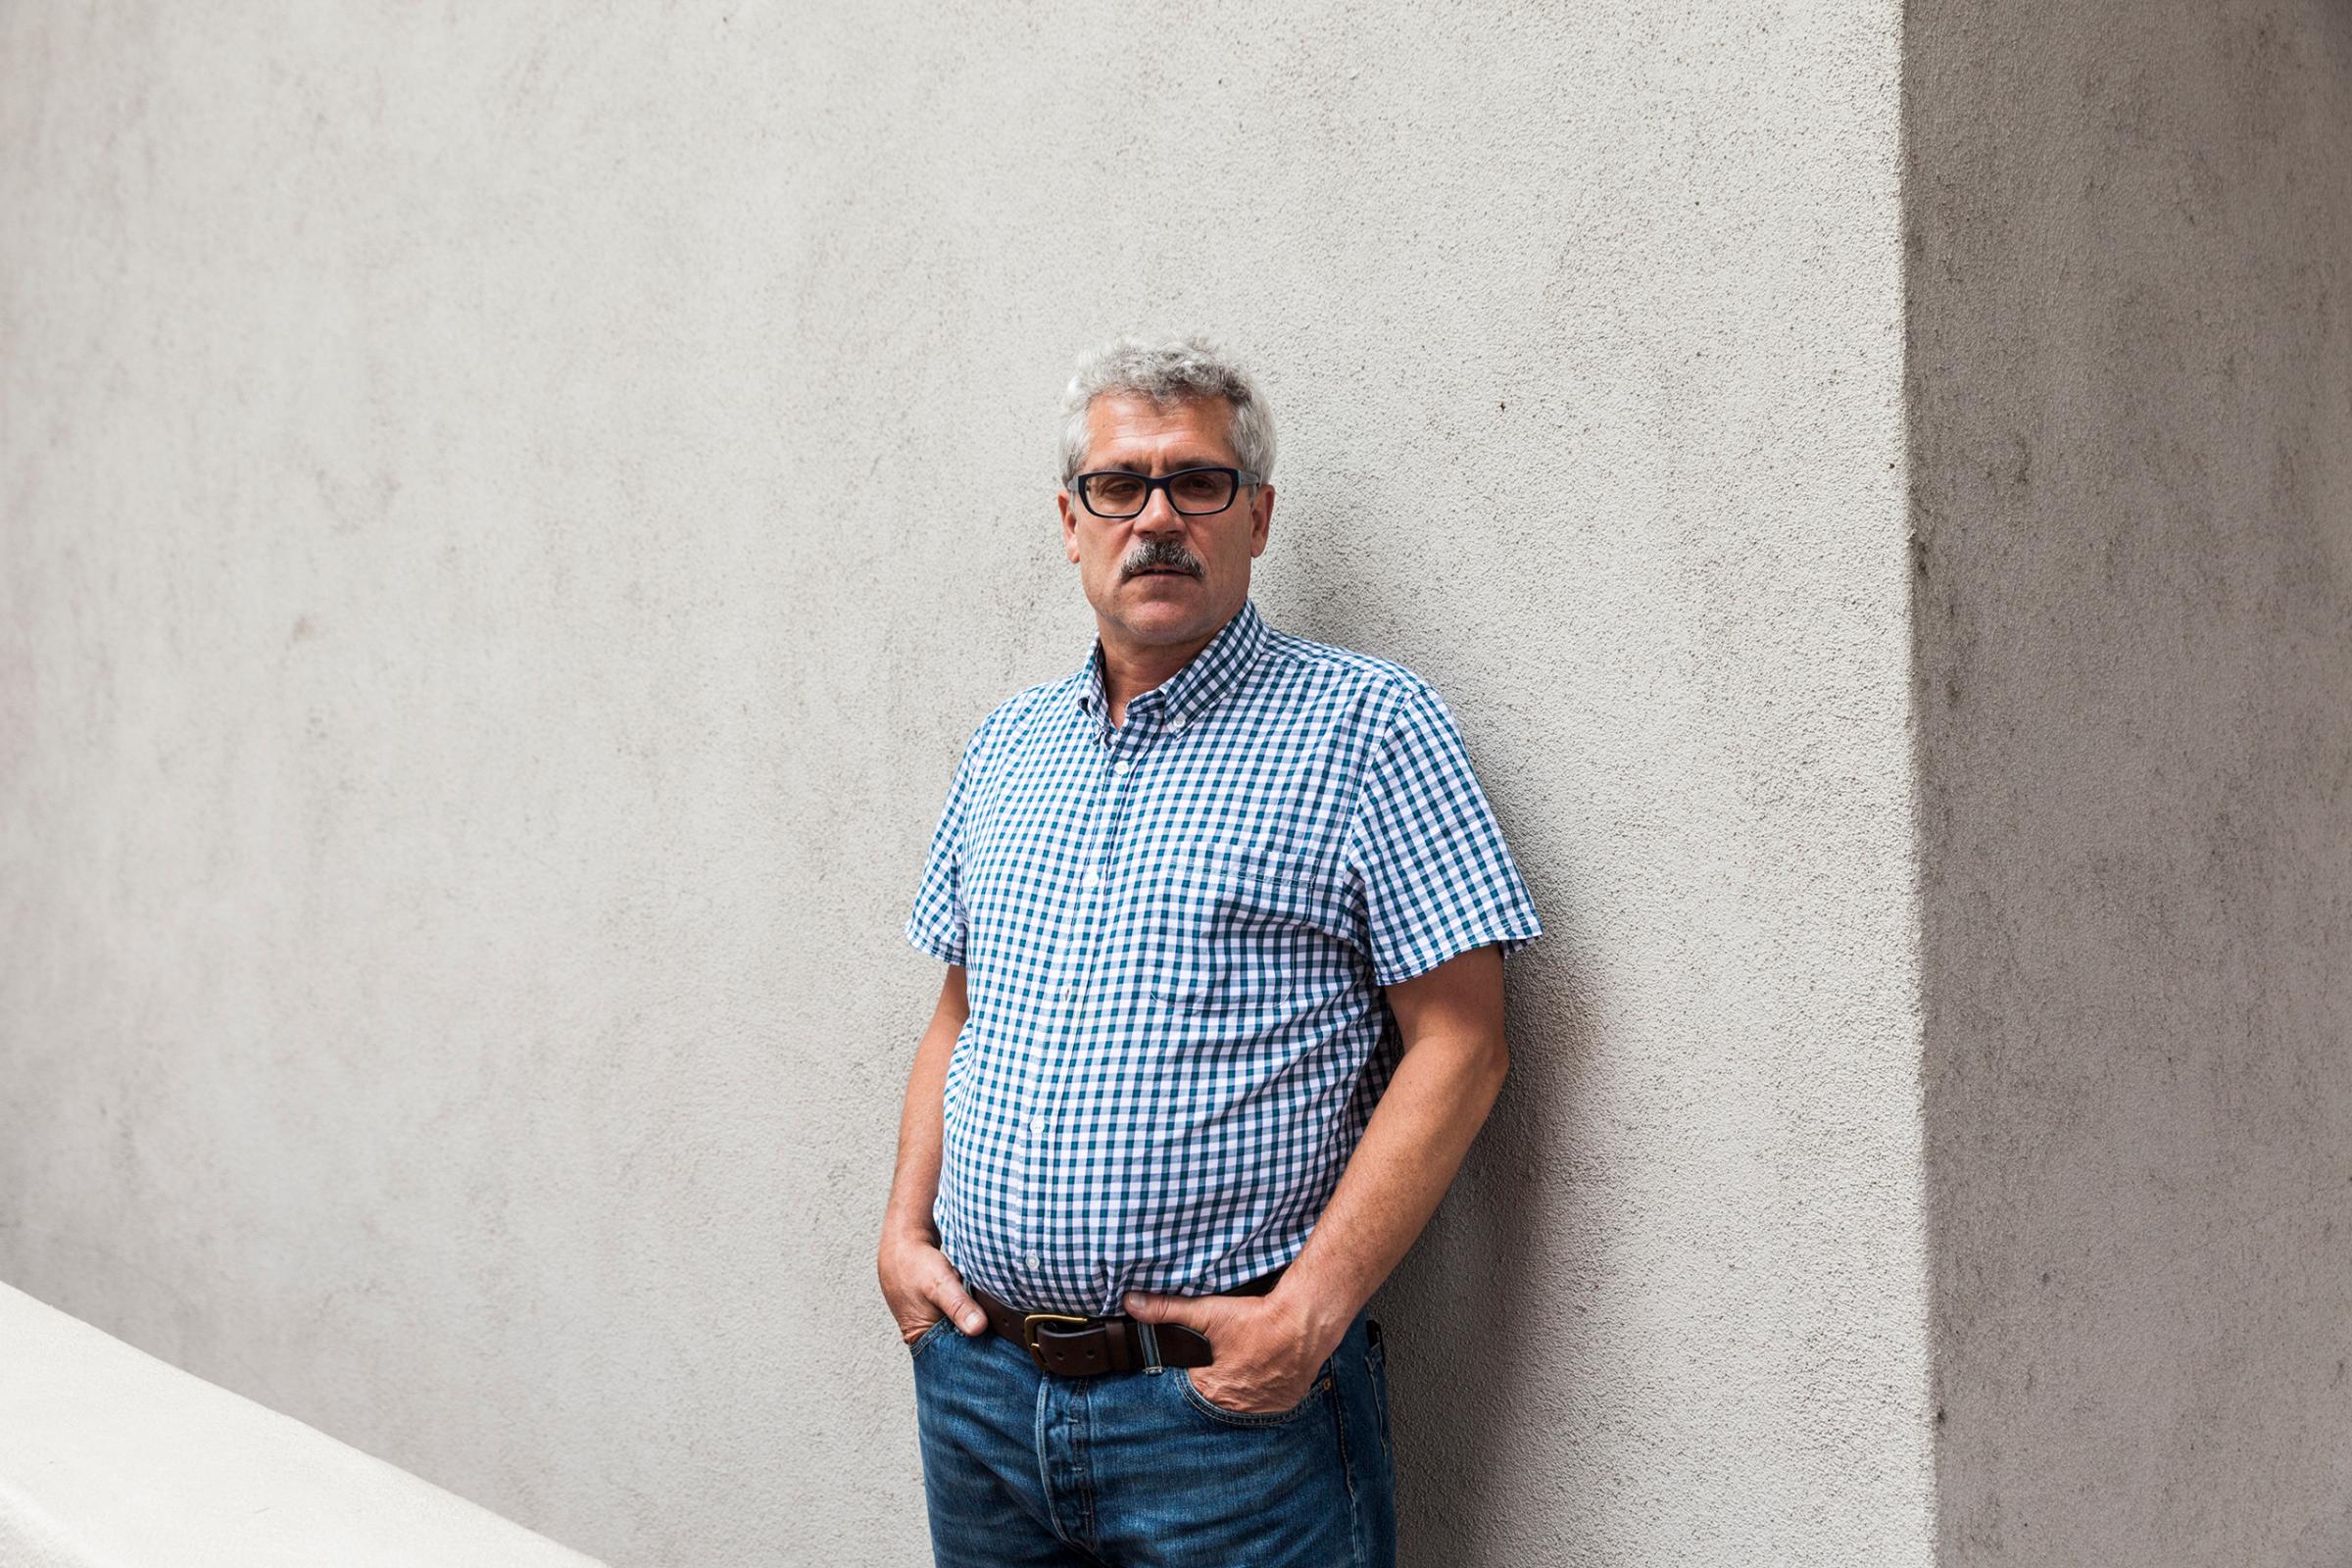 Grigory Rodchenkov, who ran the 2014 Sochi Olympic Games antidoping test laboratory, said he developed a three-drug cocktail of banned substances that he provided to dozens of Russian athletes, in Los Angeles.